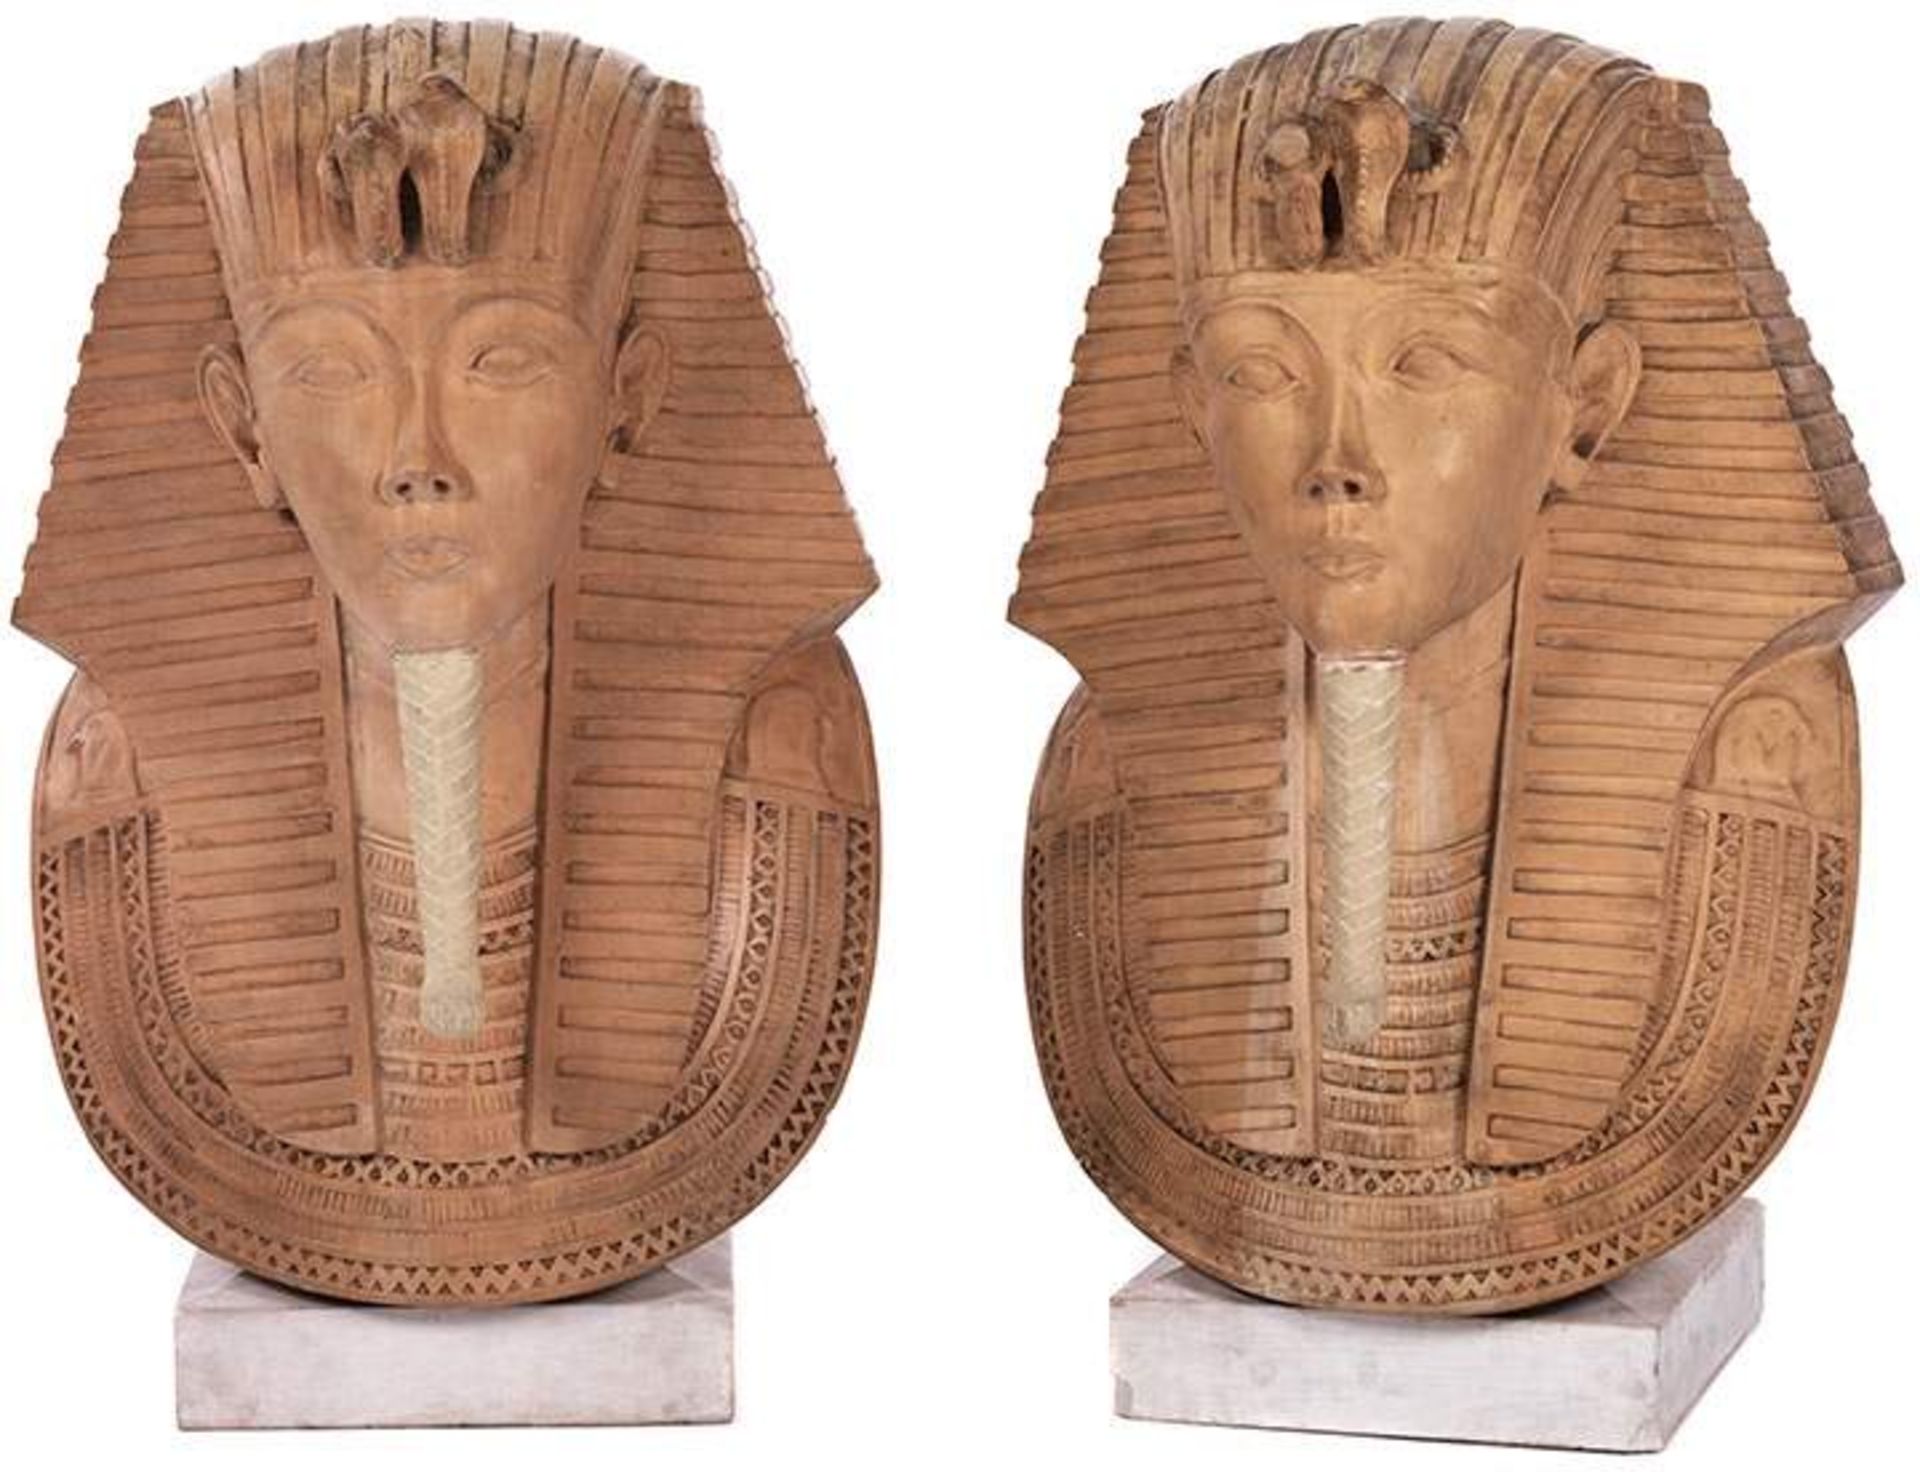 Pair of colossal pharaoh bustsHeight: ca. 90 cm. Ochre-coloured stone and gesso. On base. Damaged